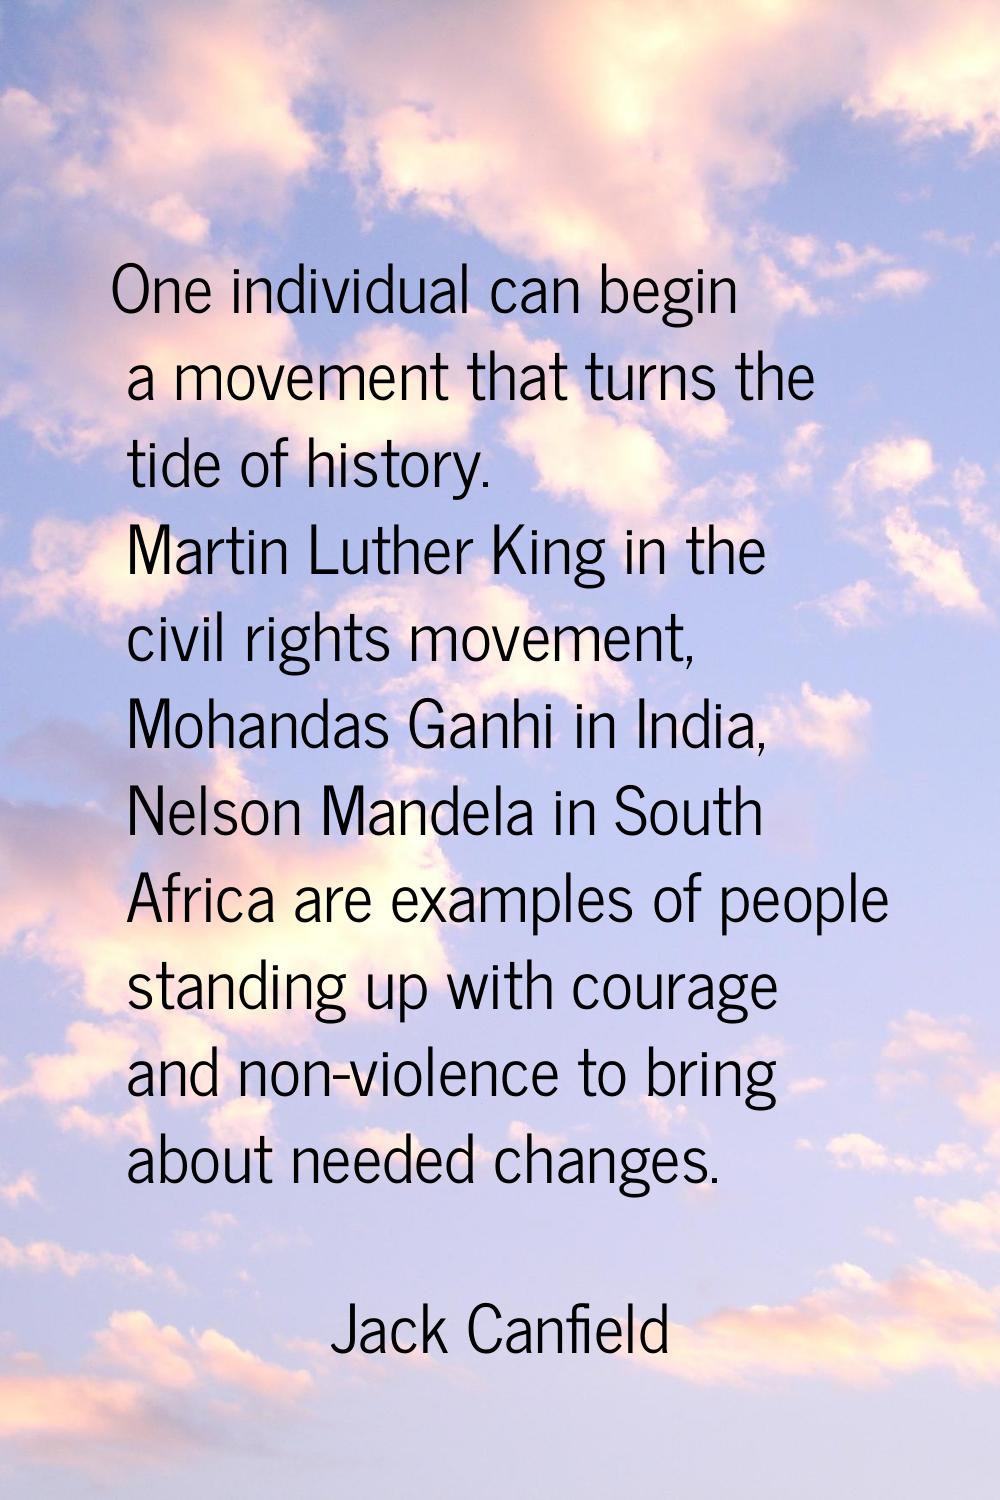 One individual can begin a movement that turns the tide of history. Martin Luther King in the civil